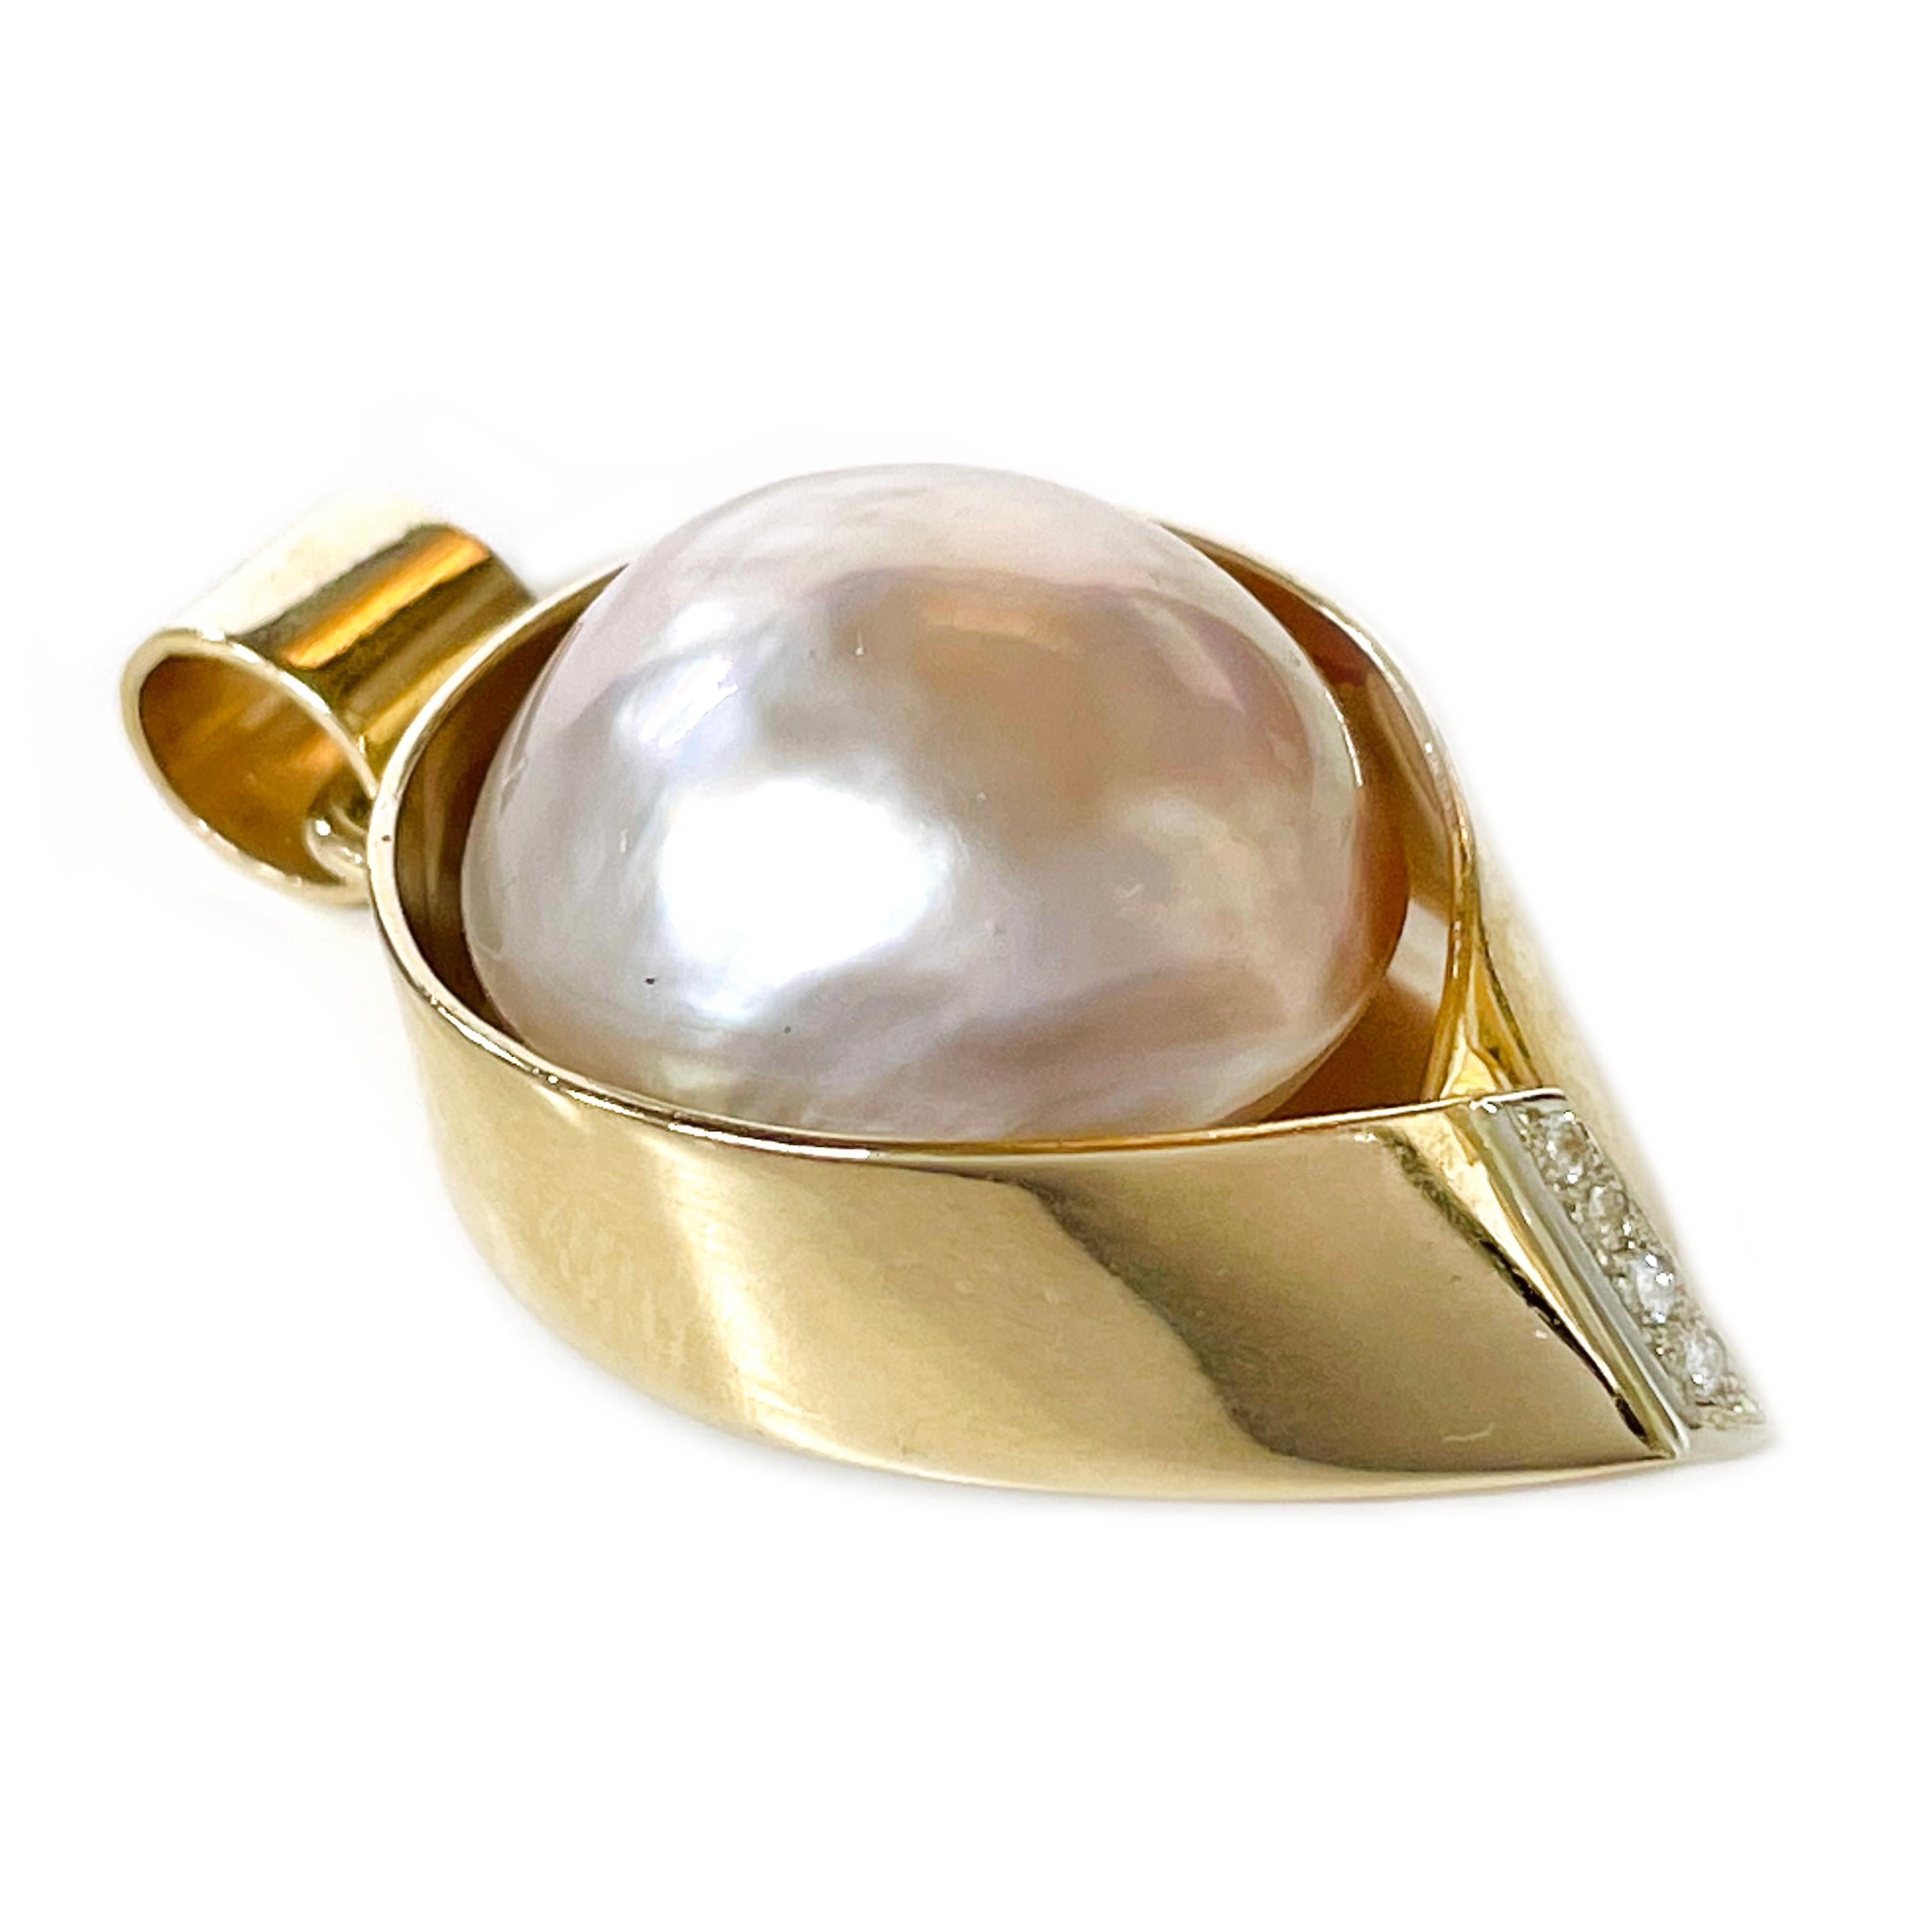 Ragnar Rose Gold Mabe Pearl Diamond Pendant. The pendant features a pink Mabe pearl set in a special open bezel and four melee diamonds. The pearl has good luster and hues of pink with white on the bottom. The diamonds are bead-set in white gold on